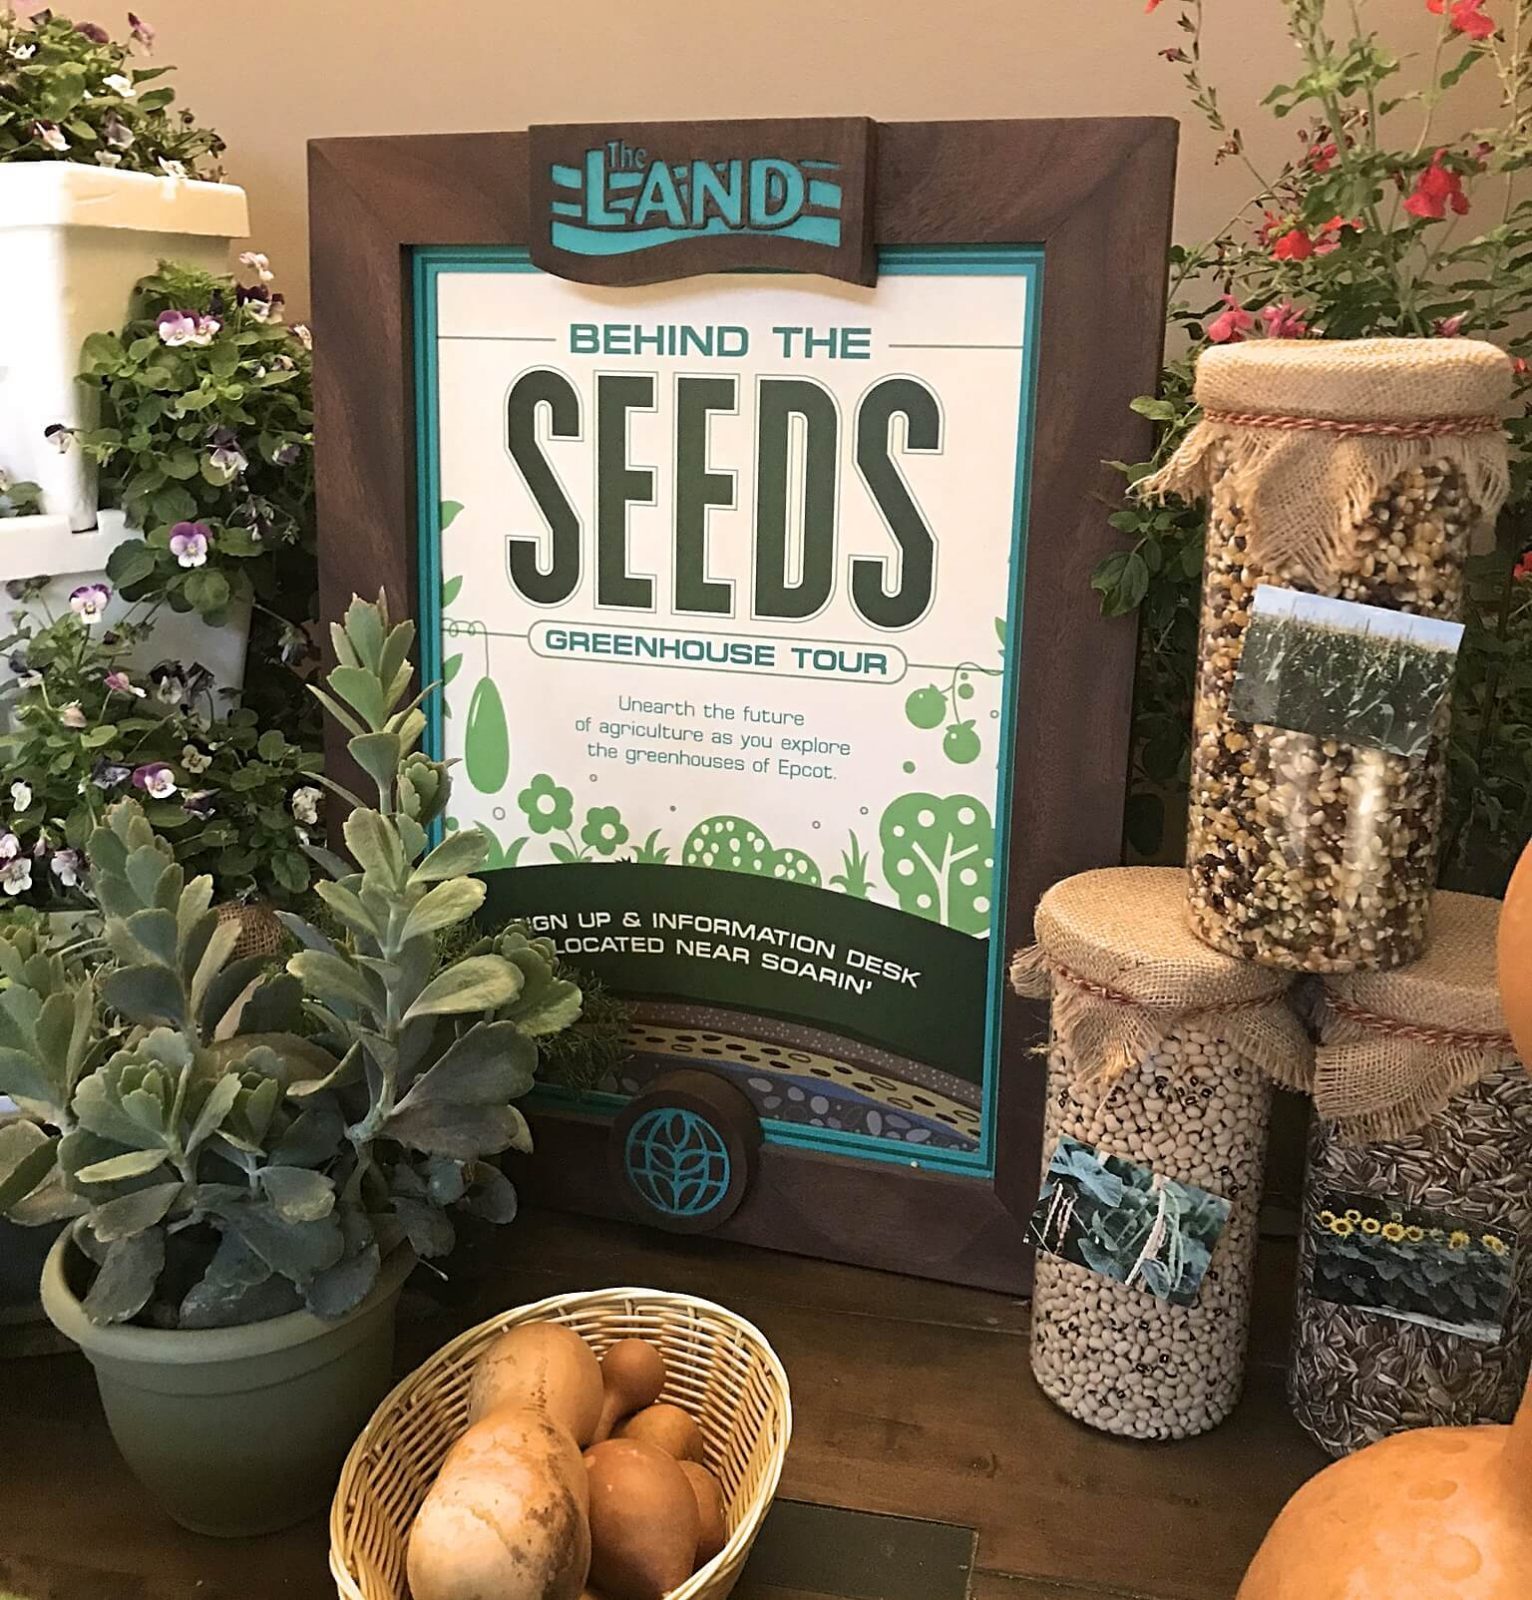 Behind the seeds greenhouse tour sign